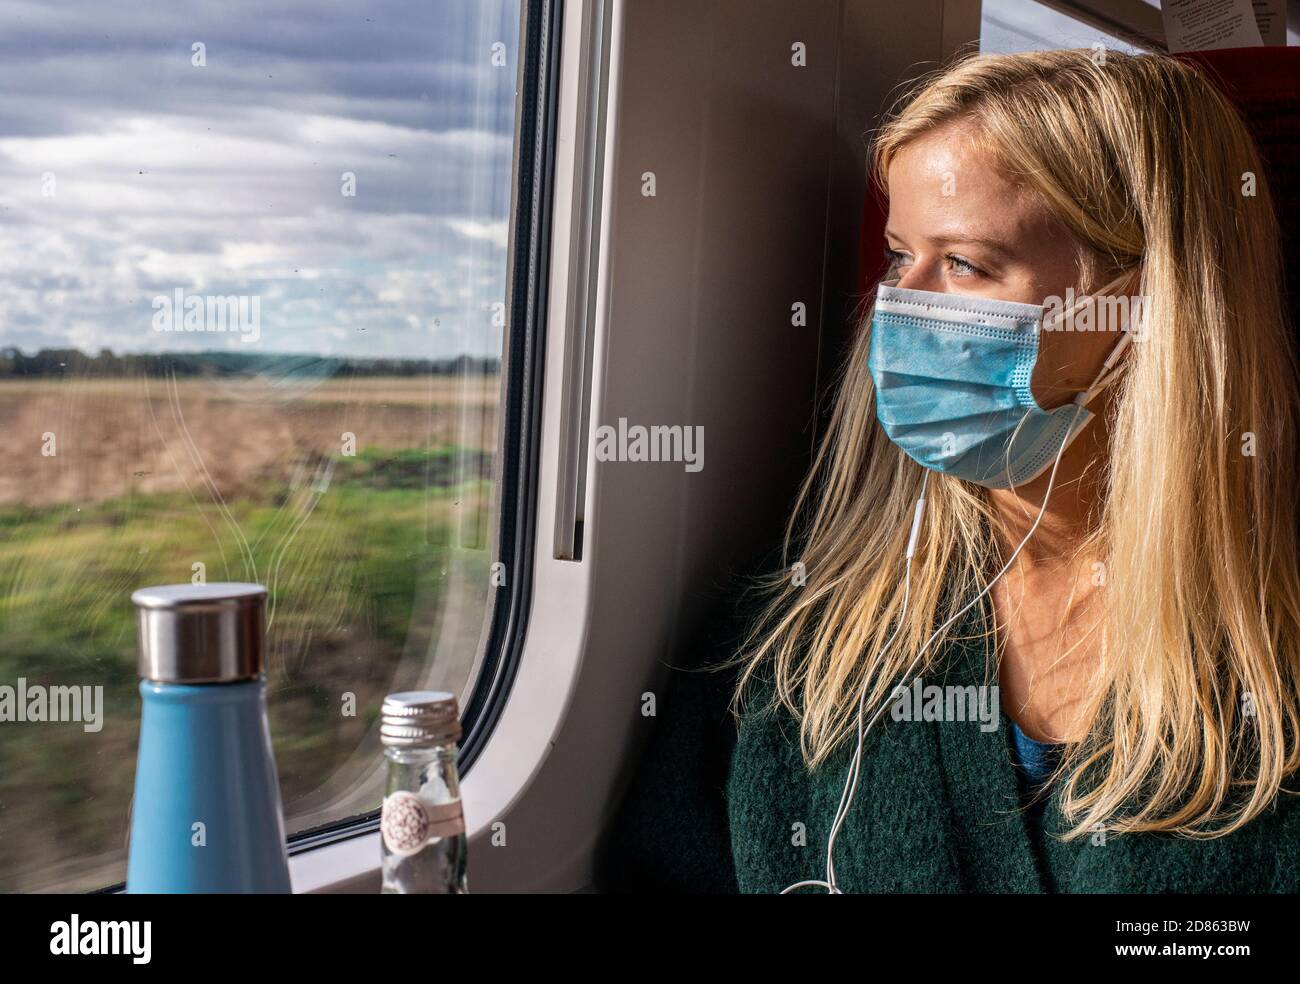 Woman wearing face mask on train looking through window Stock Photo